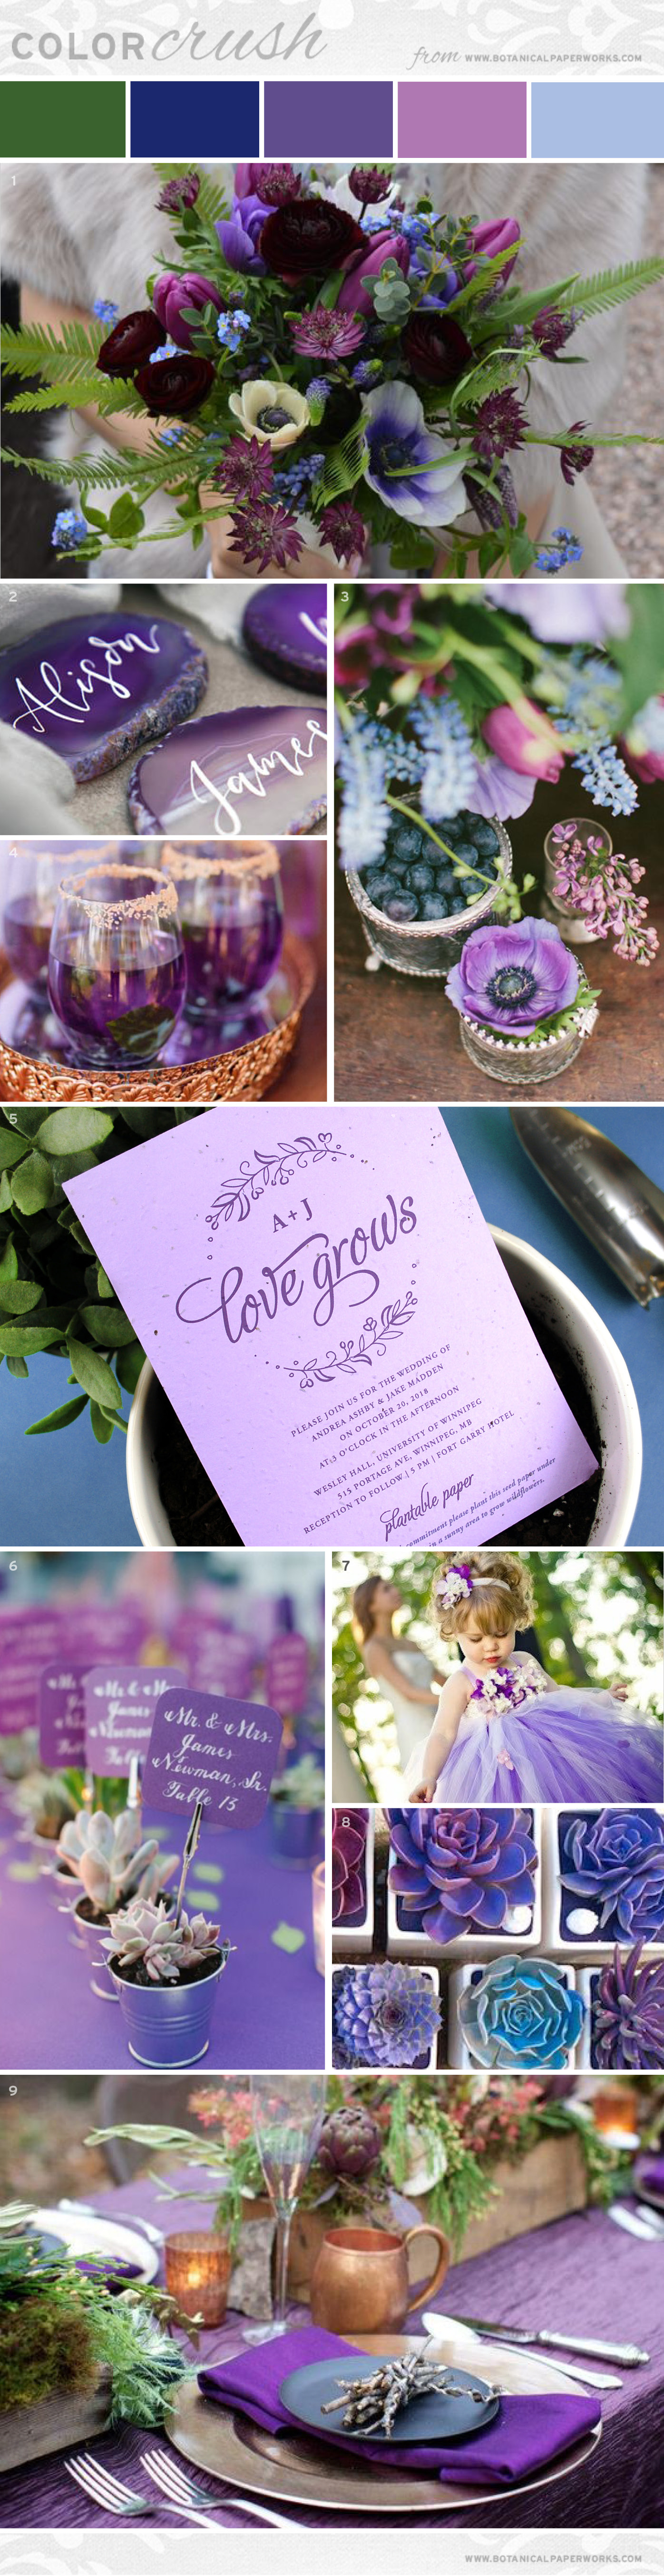 Ultra Violet is Pantone’s Color of the Year for 2018 and is sure to be a hit for wedding season. Take a look at this imaginative palette pairing it with lilac, cool blues & rose gold accents.